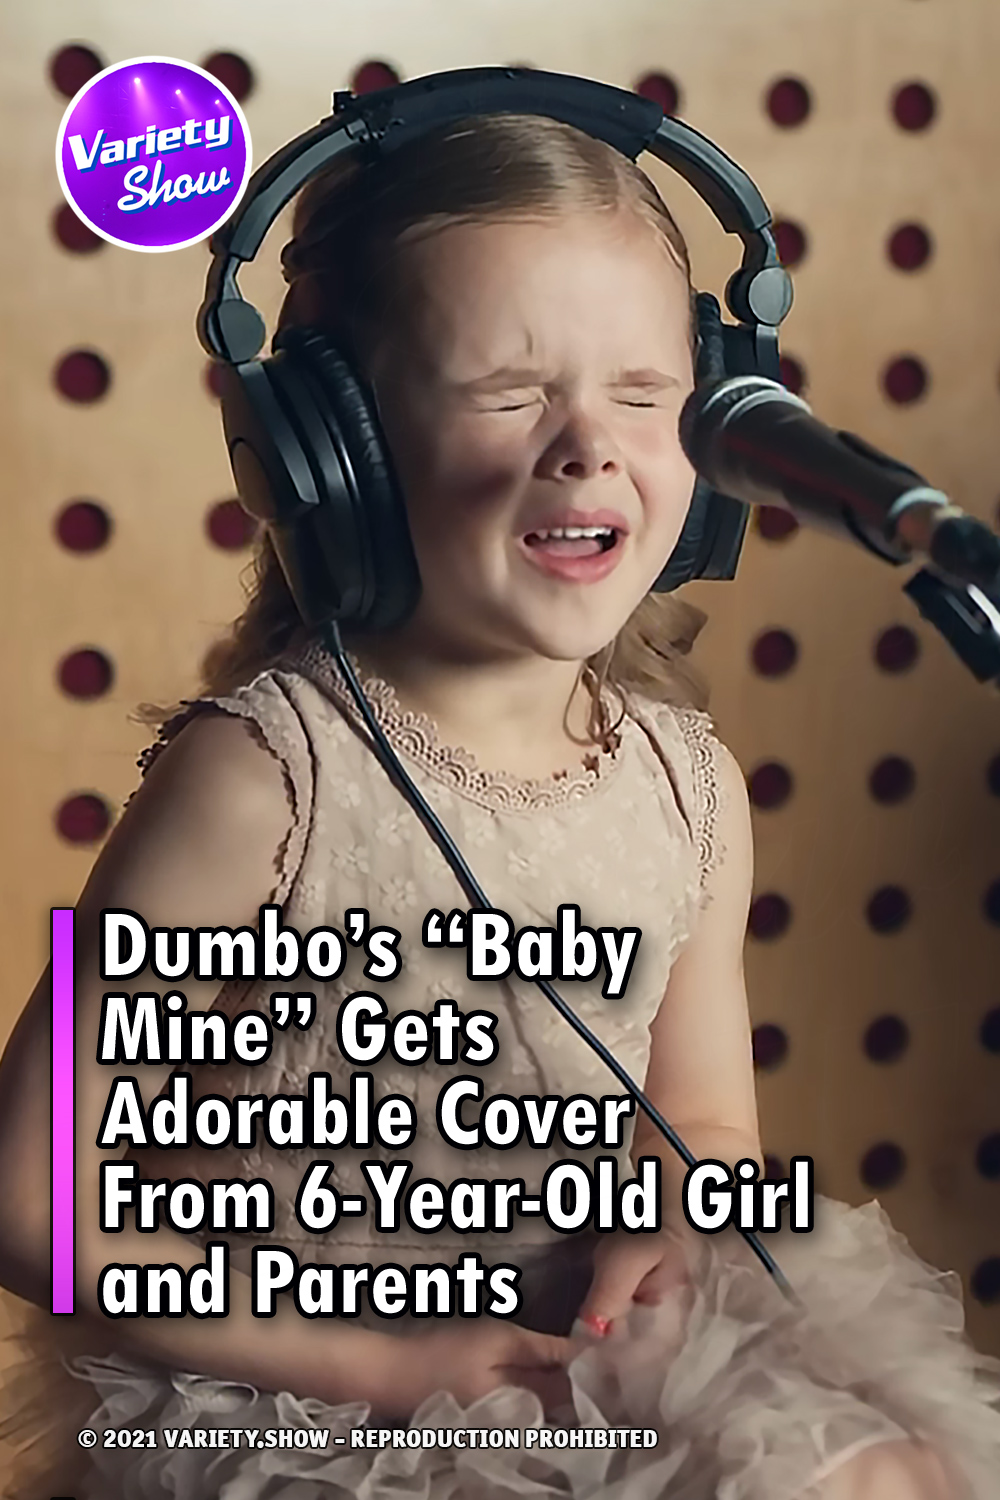 Dumbo’s “Baby Mine” Gets Adorable Cover From 6-Year-Old Girl and Parents